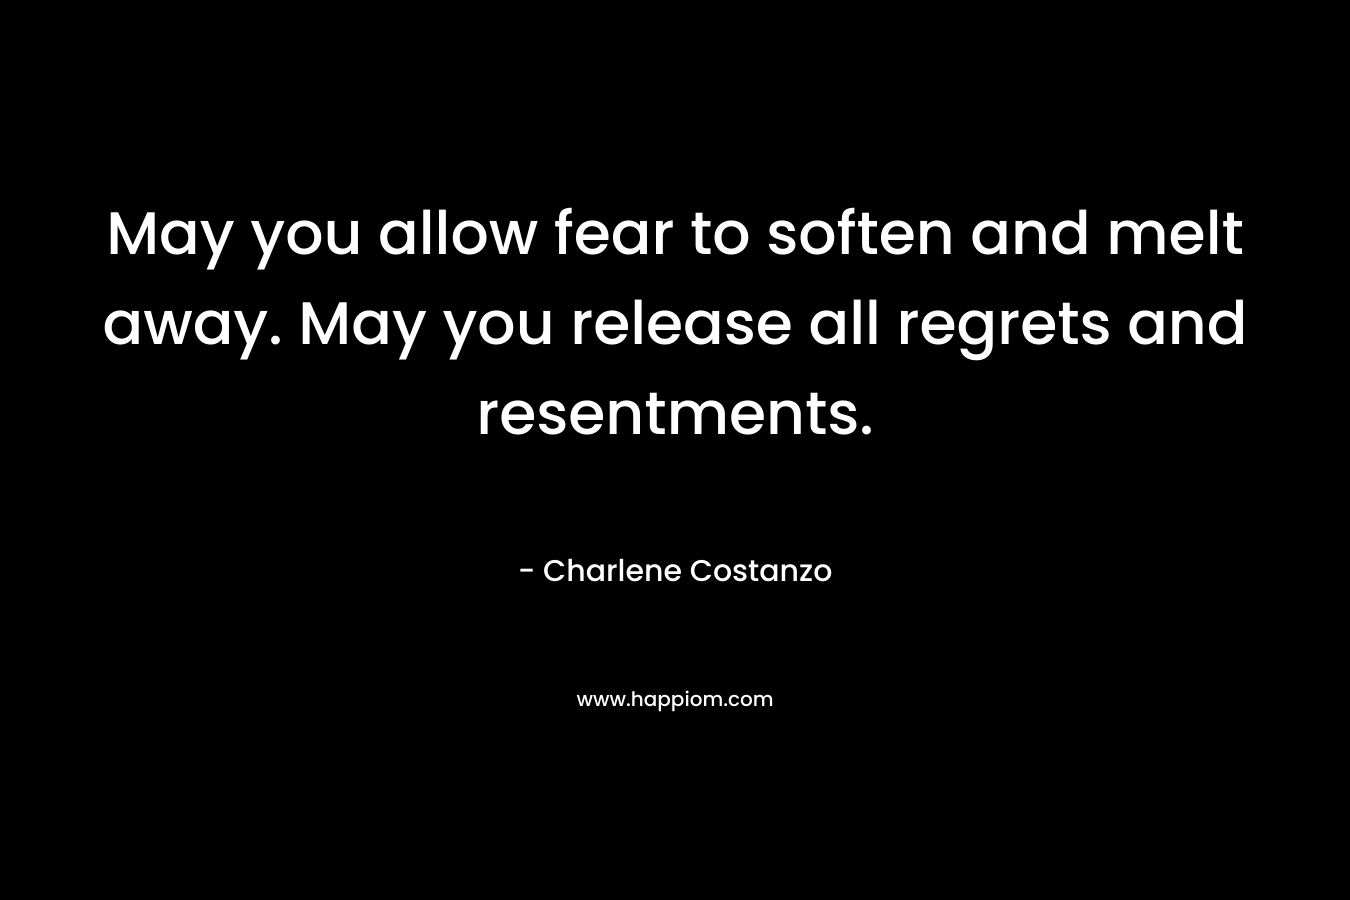 May you allow fear to soften and melt away. May you release all regrets and resentments. – Charlene Costanzo